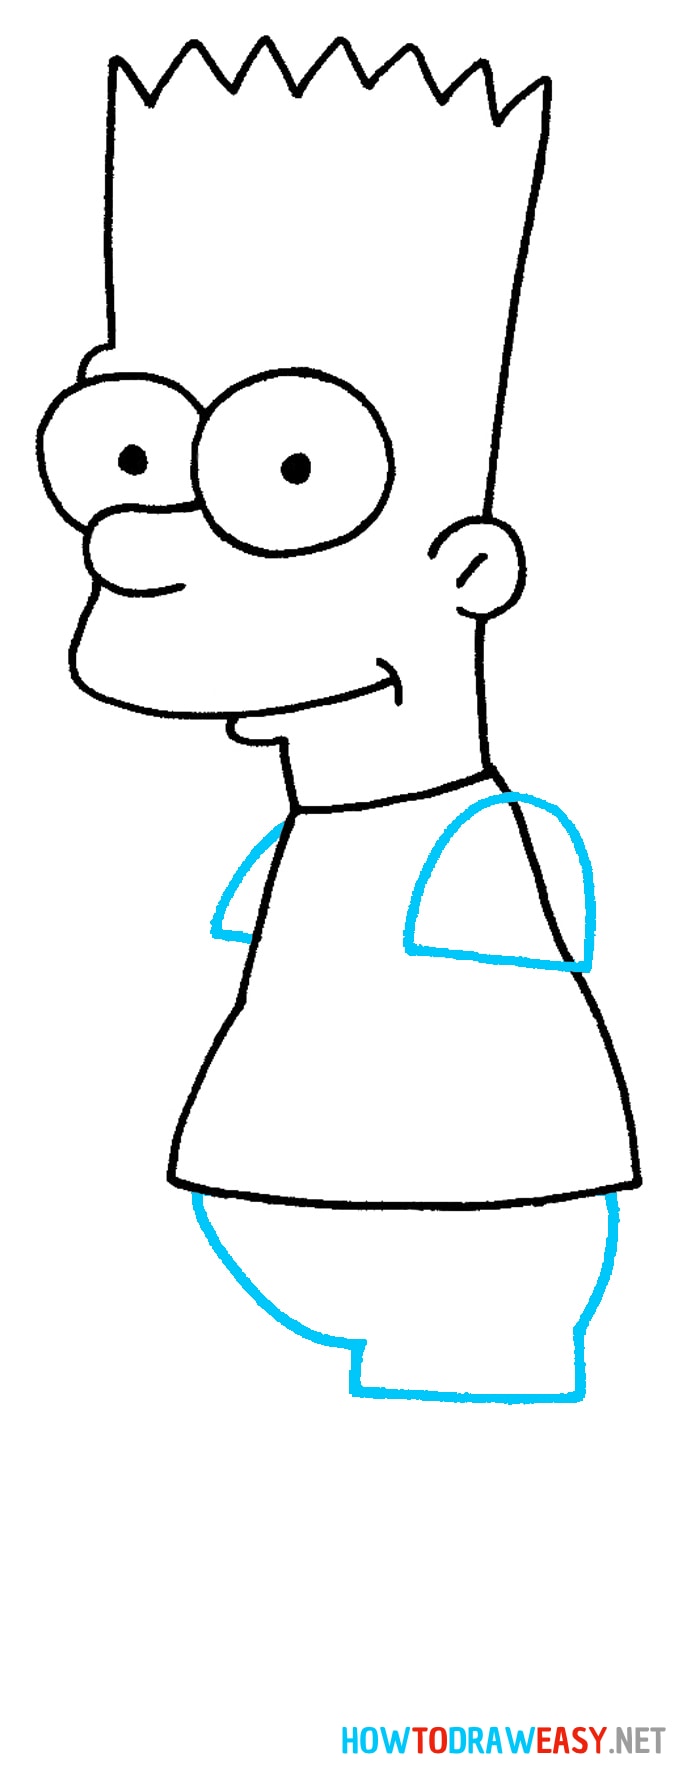 How to Draw Bart Simpson - Draw for Kids